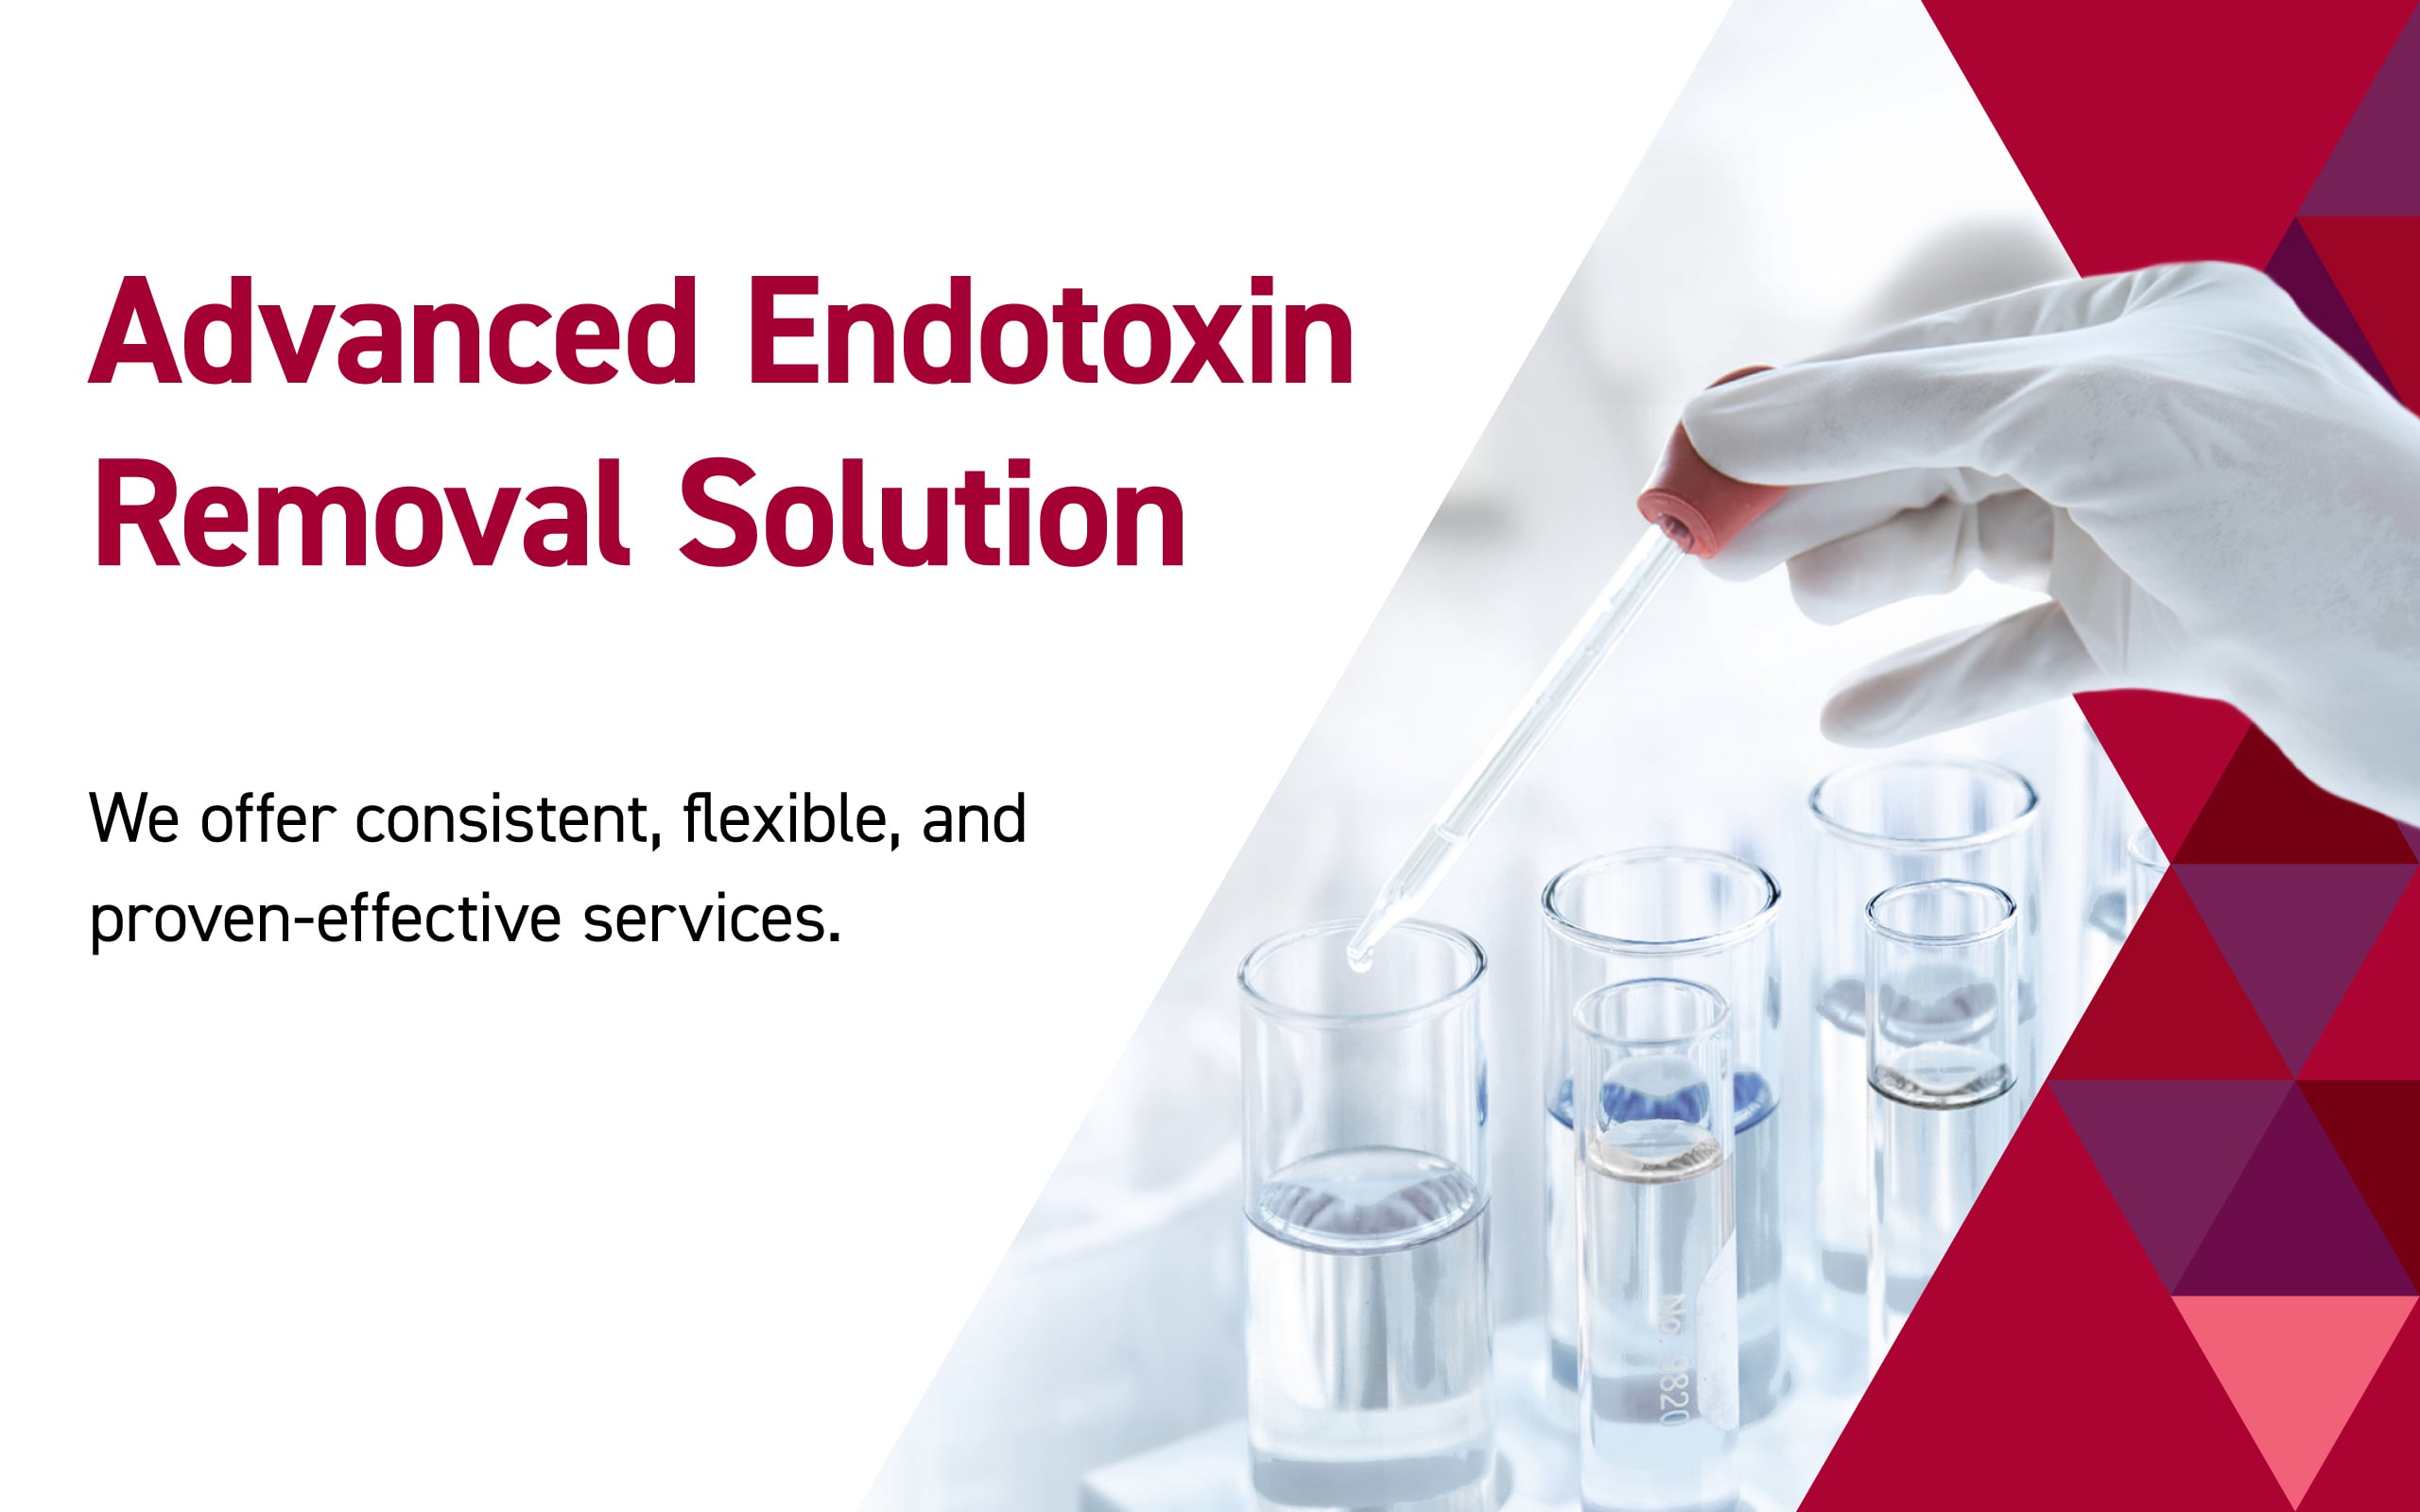 Your New Partner for Endotoxin Control